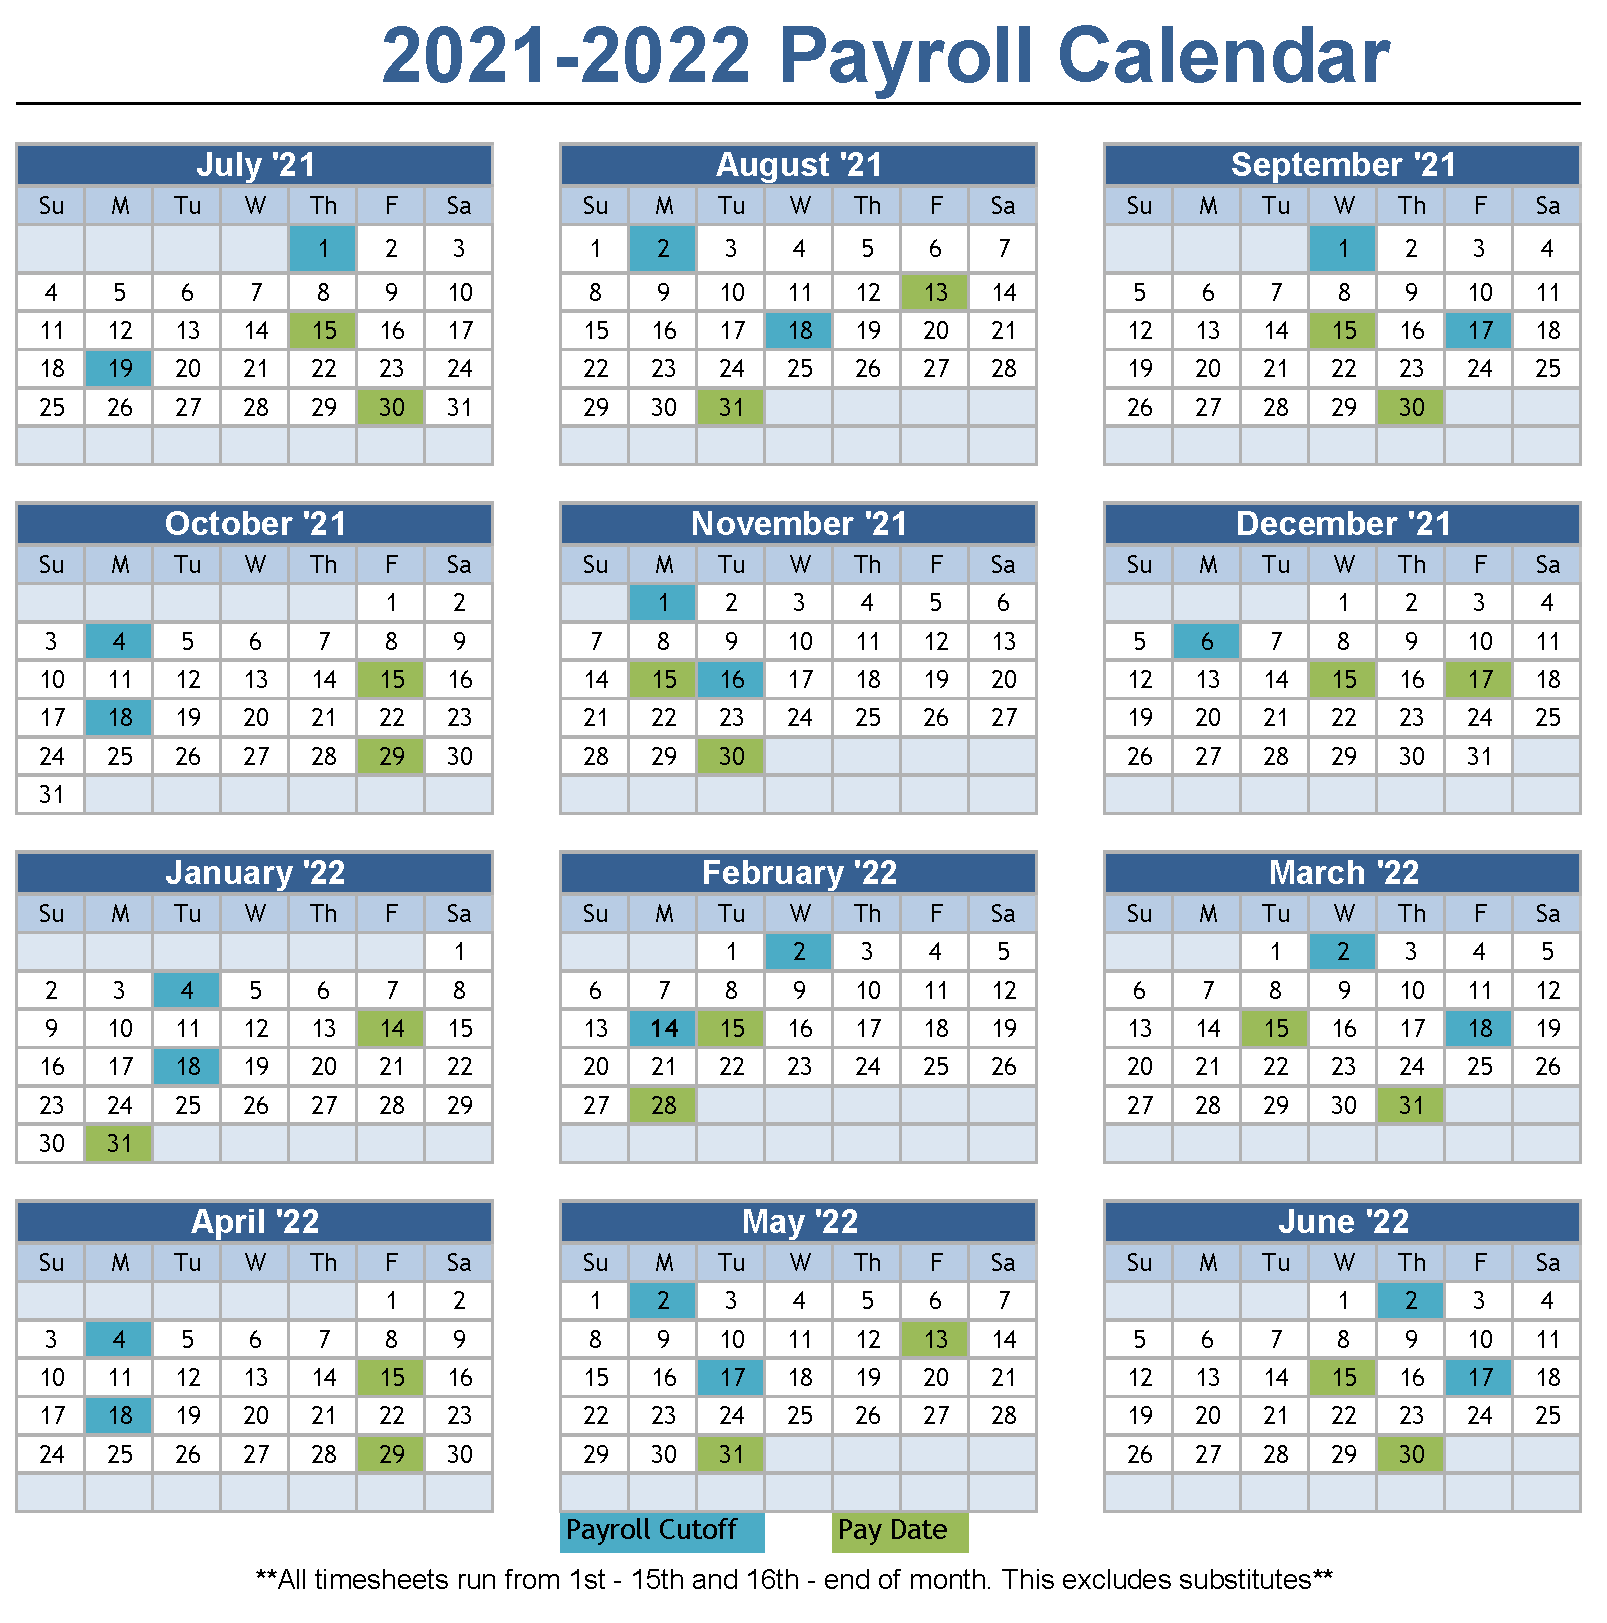 NCR Corporation Pay Schedule 2022